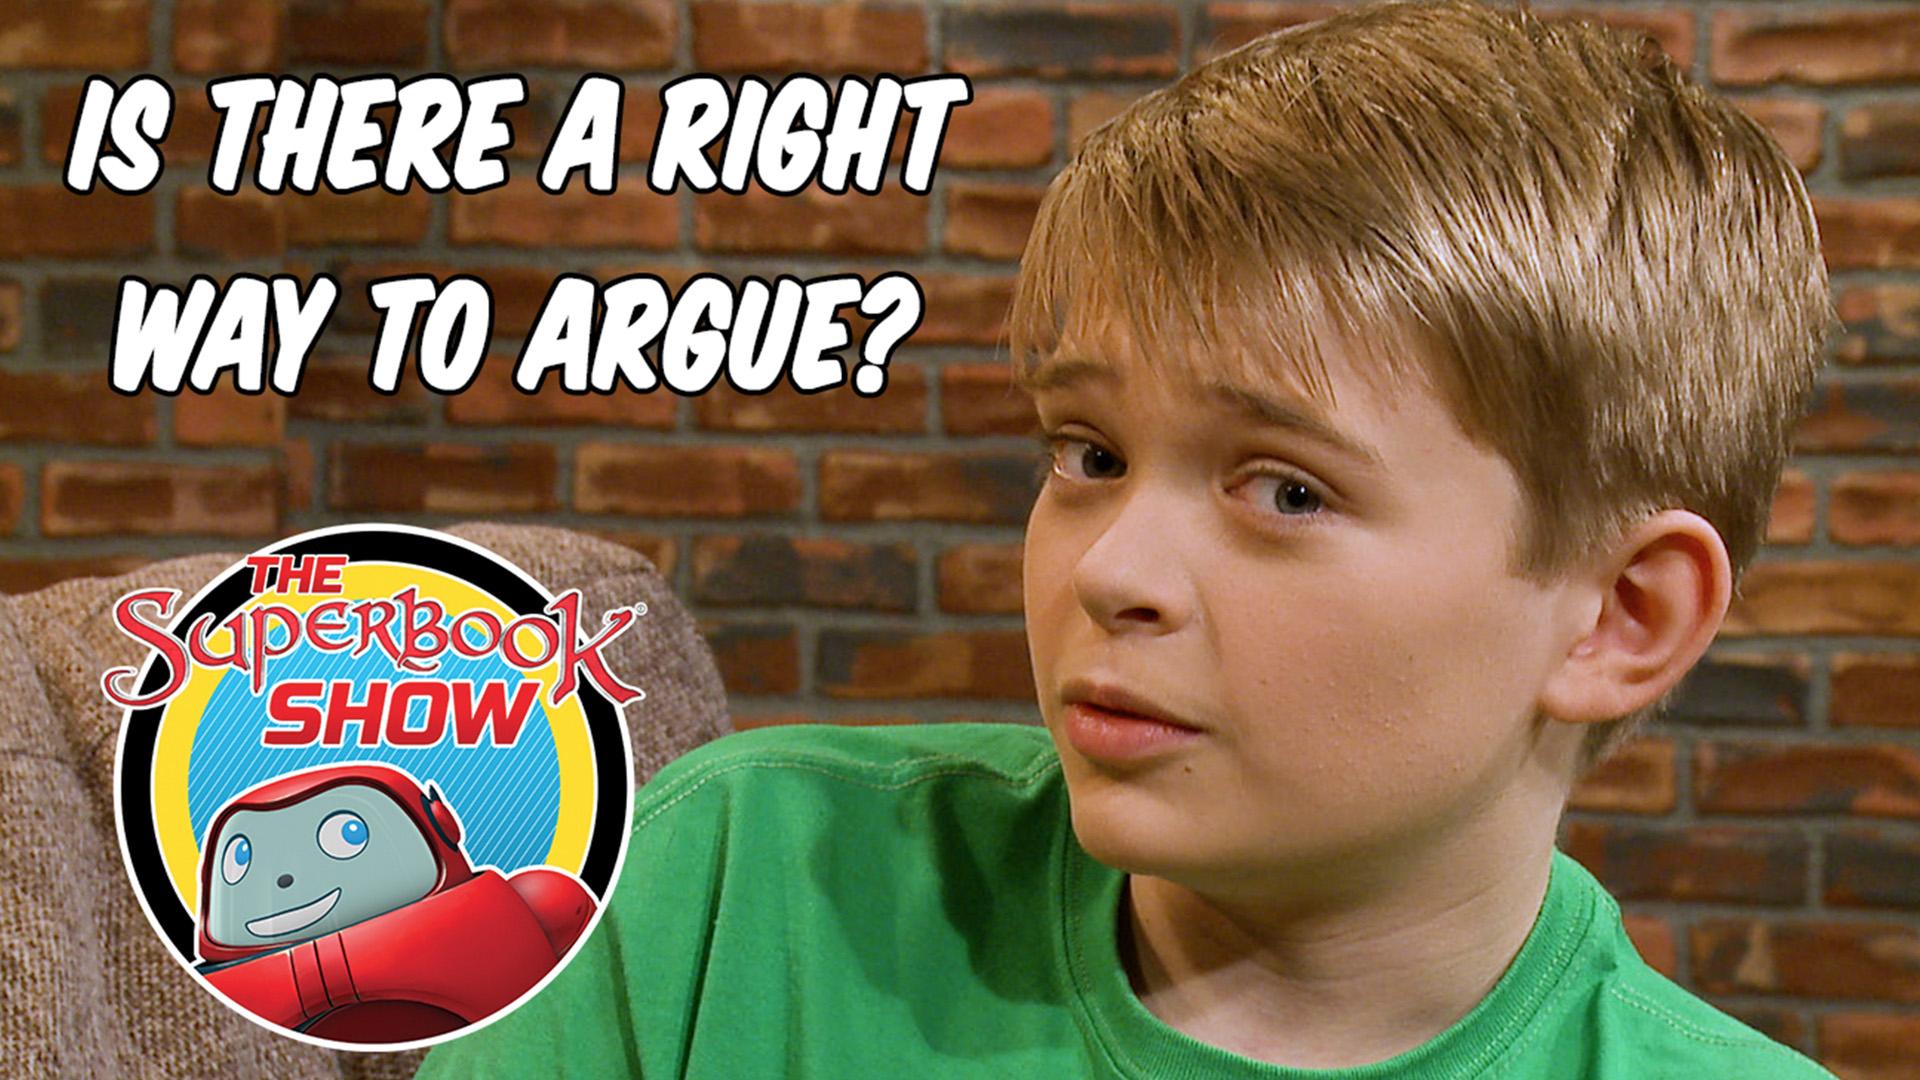 Is There a Right Way to Argue? - The Superbook Show